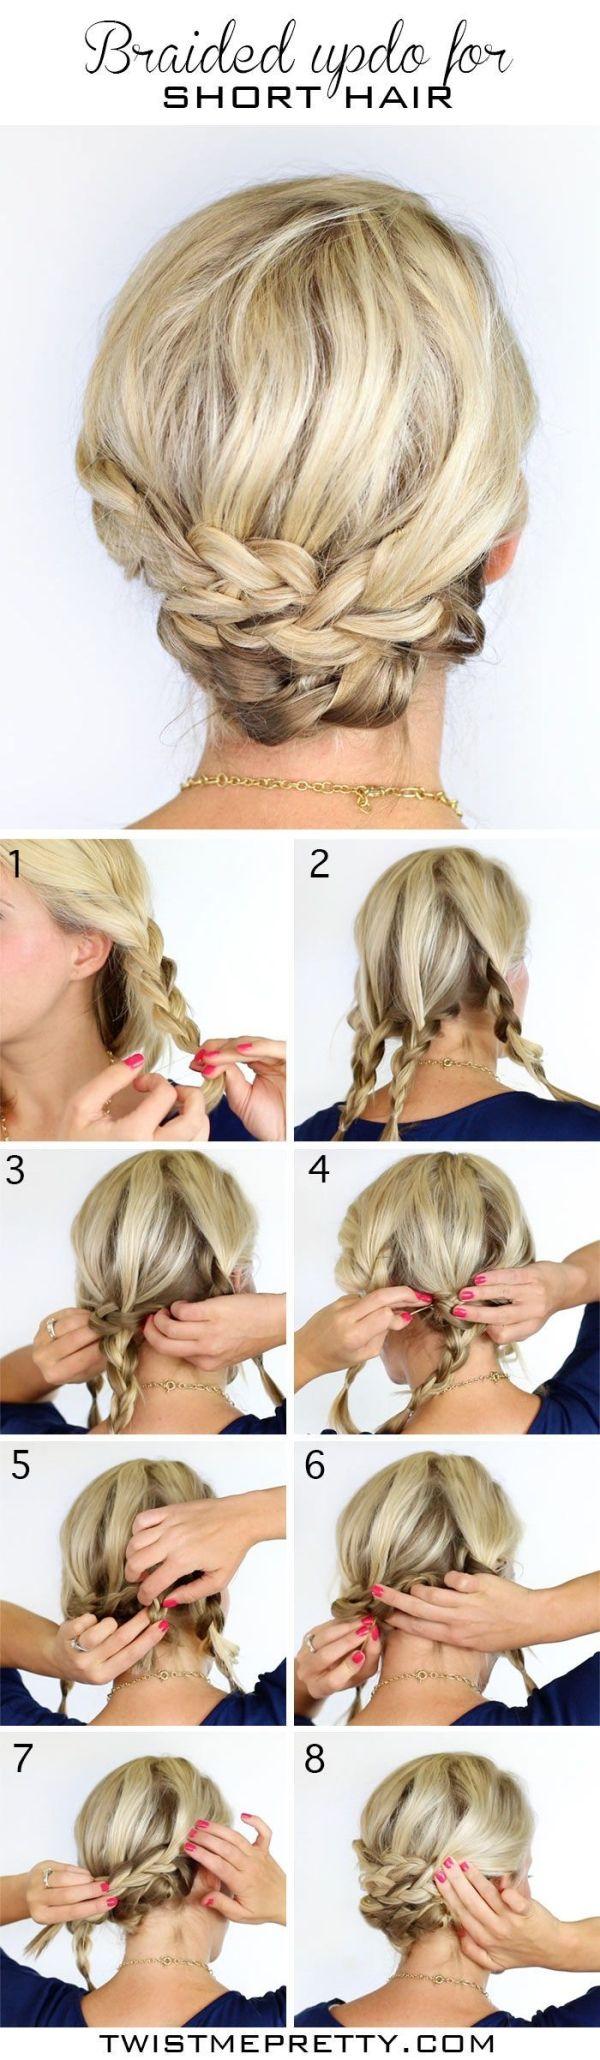 Wedding - Braided Updo Hairstyle For Short Hair